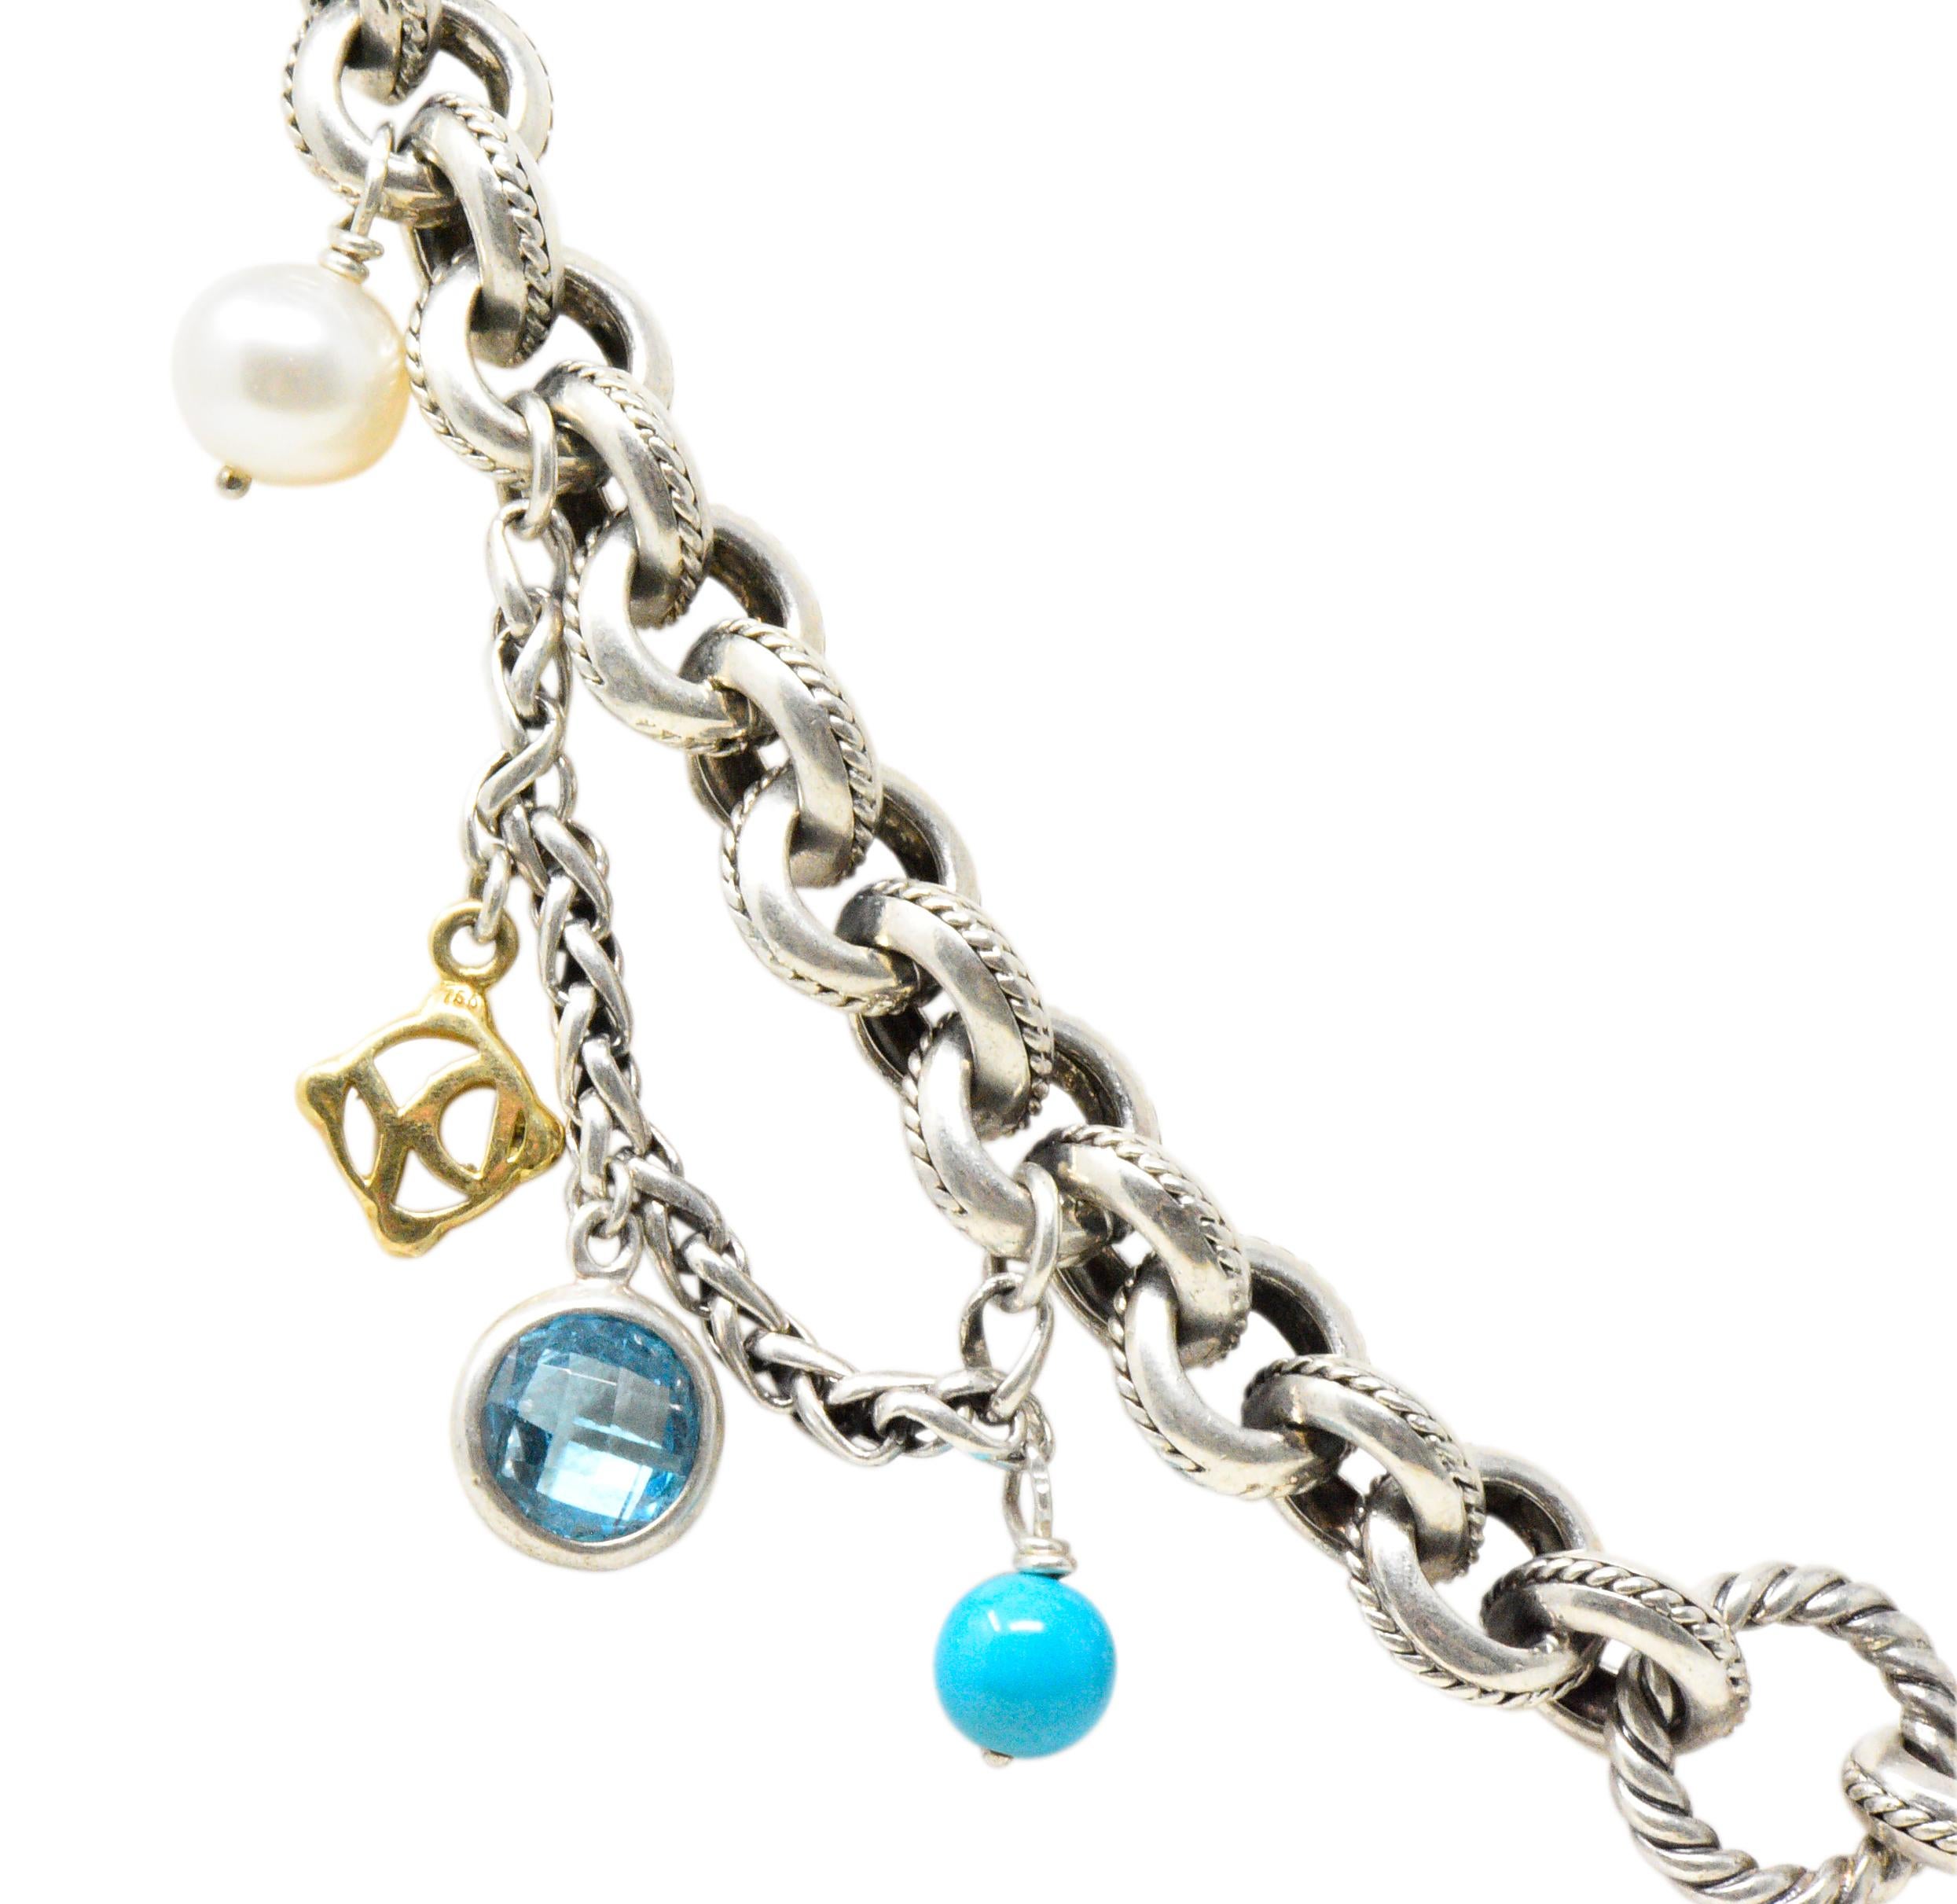 Featuring 7 faceted round blue topaz, 3 cultured pearls, 2 round turquoise beads and 3 David Yurman 18K yellow gold motifs 

High polished blackened twisted rope chain

Toggle clasp

Stamped 925, 750 and Signed D.Y. for David Yurman 

Measures: 18